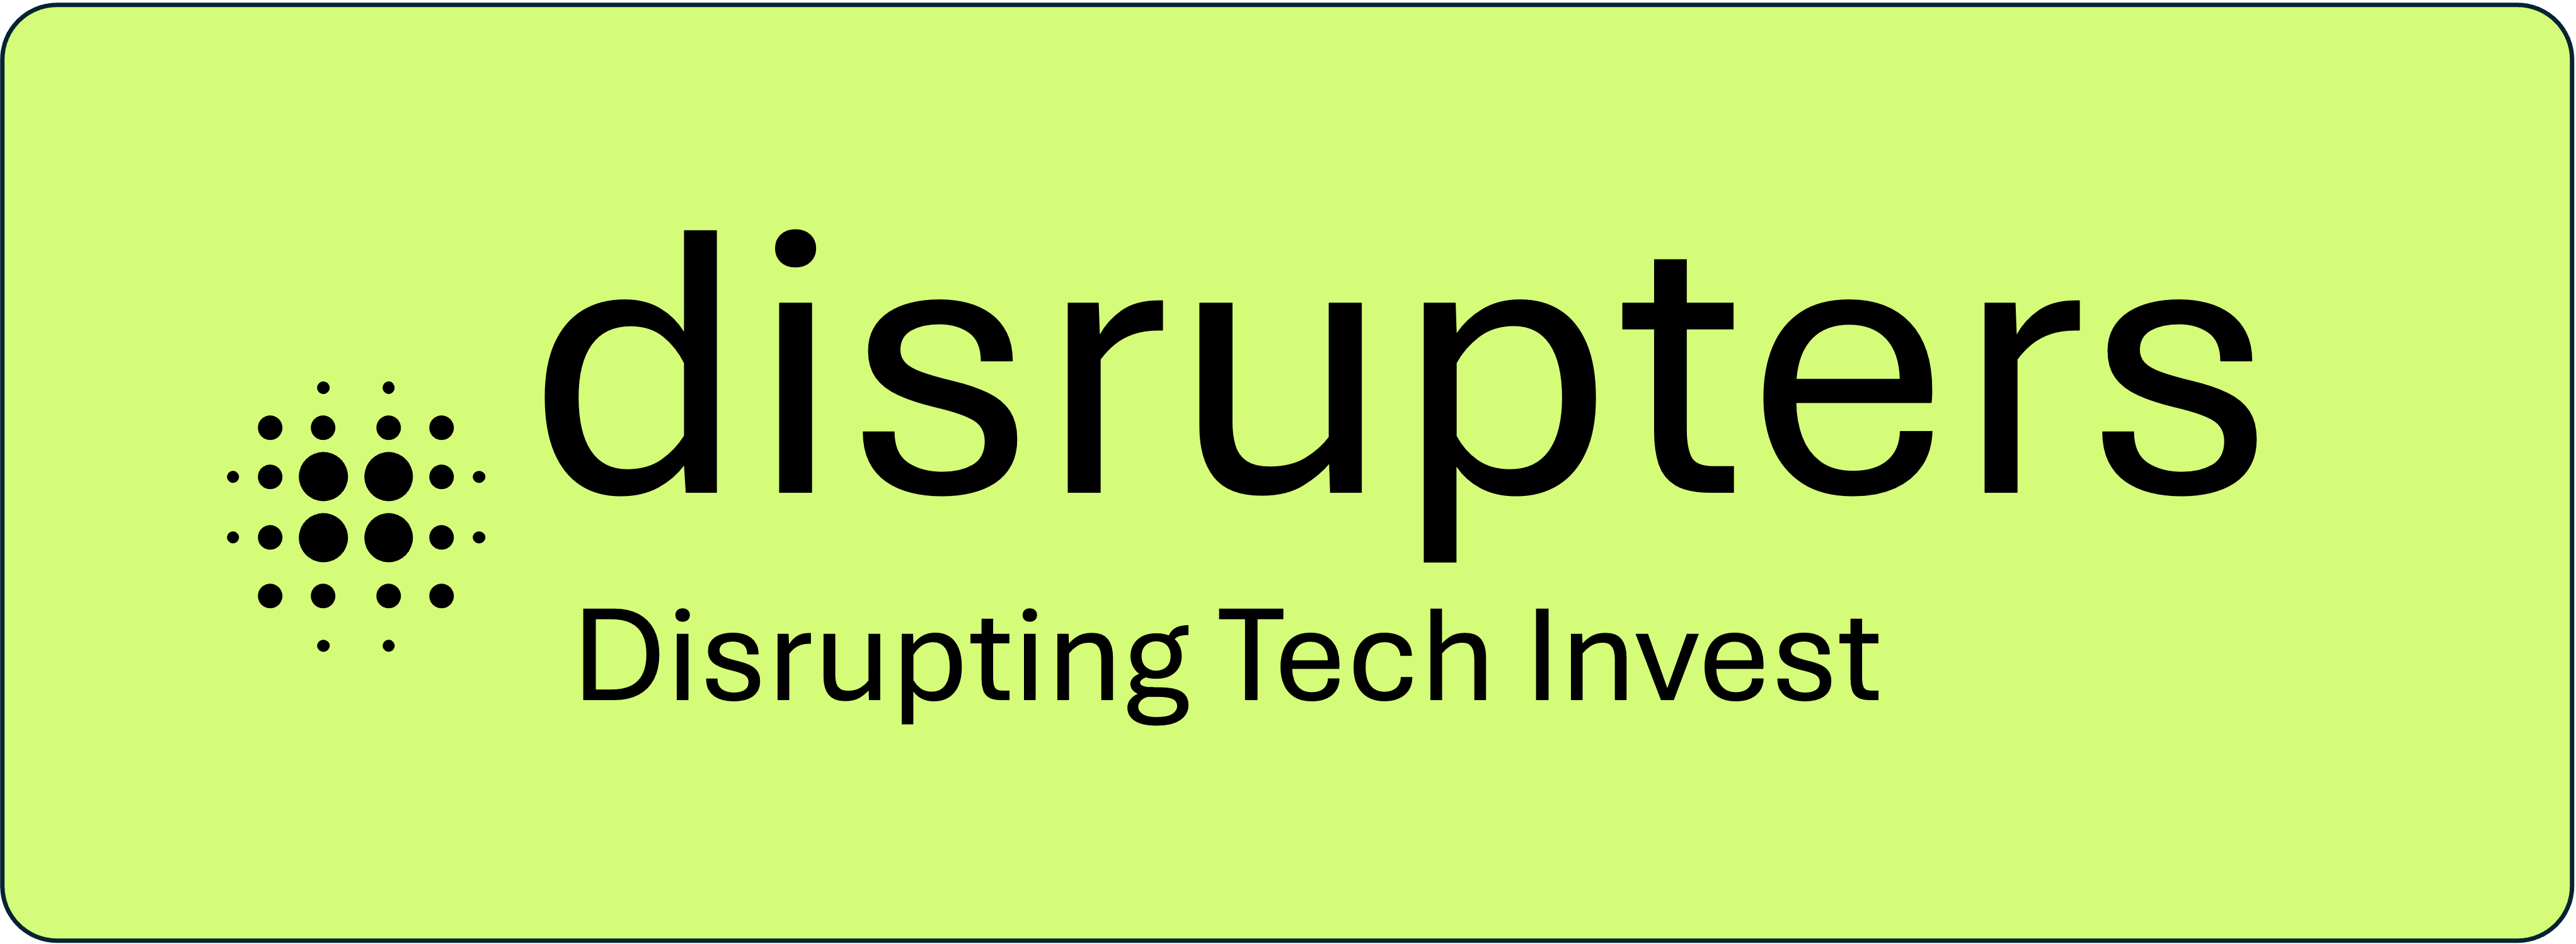 Disrupting Tech Invest